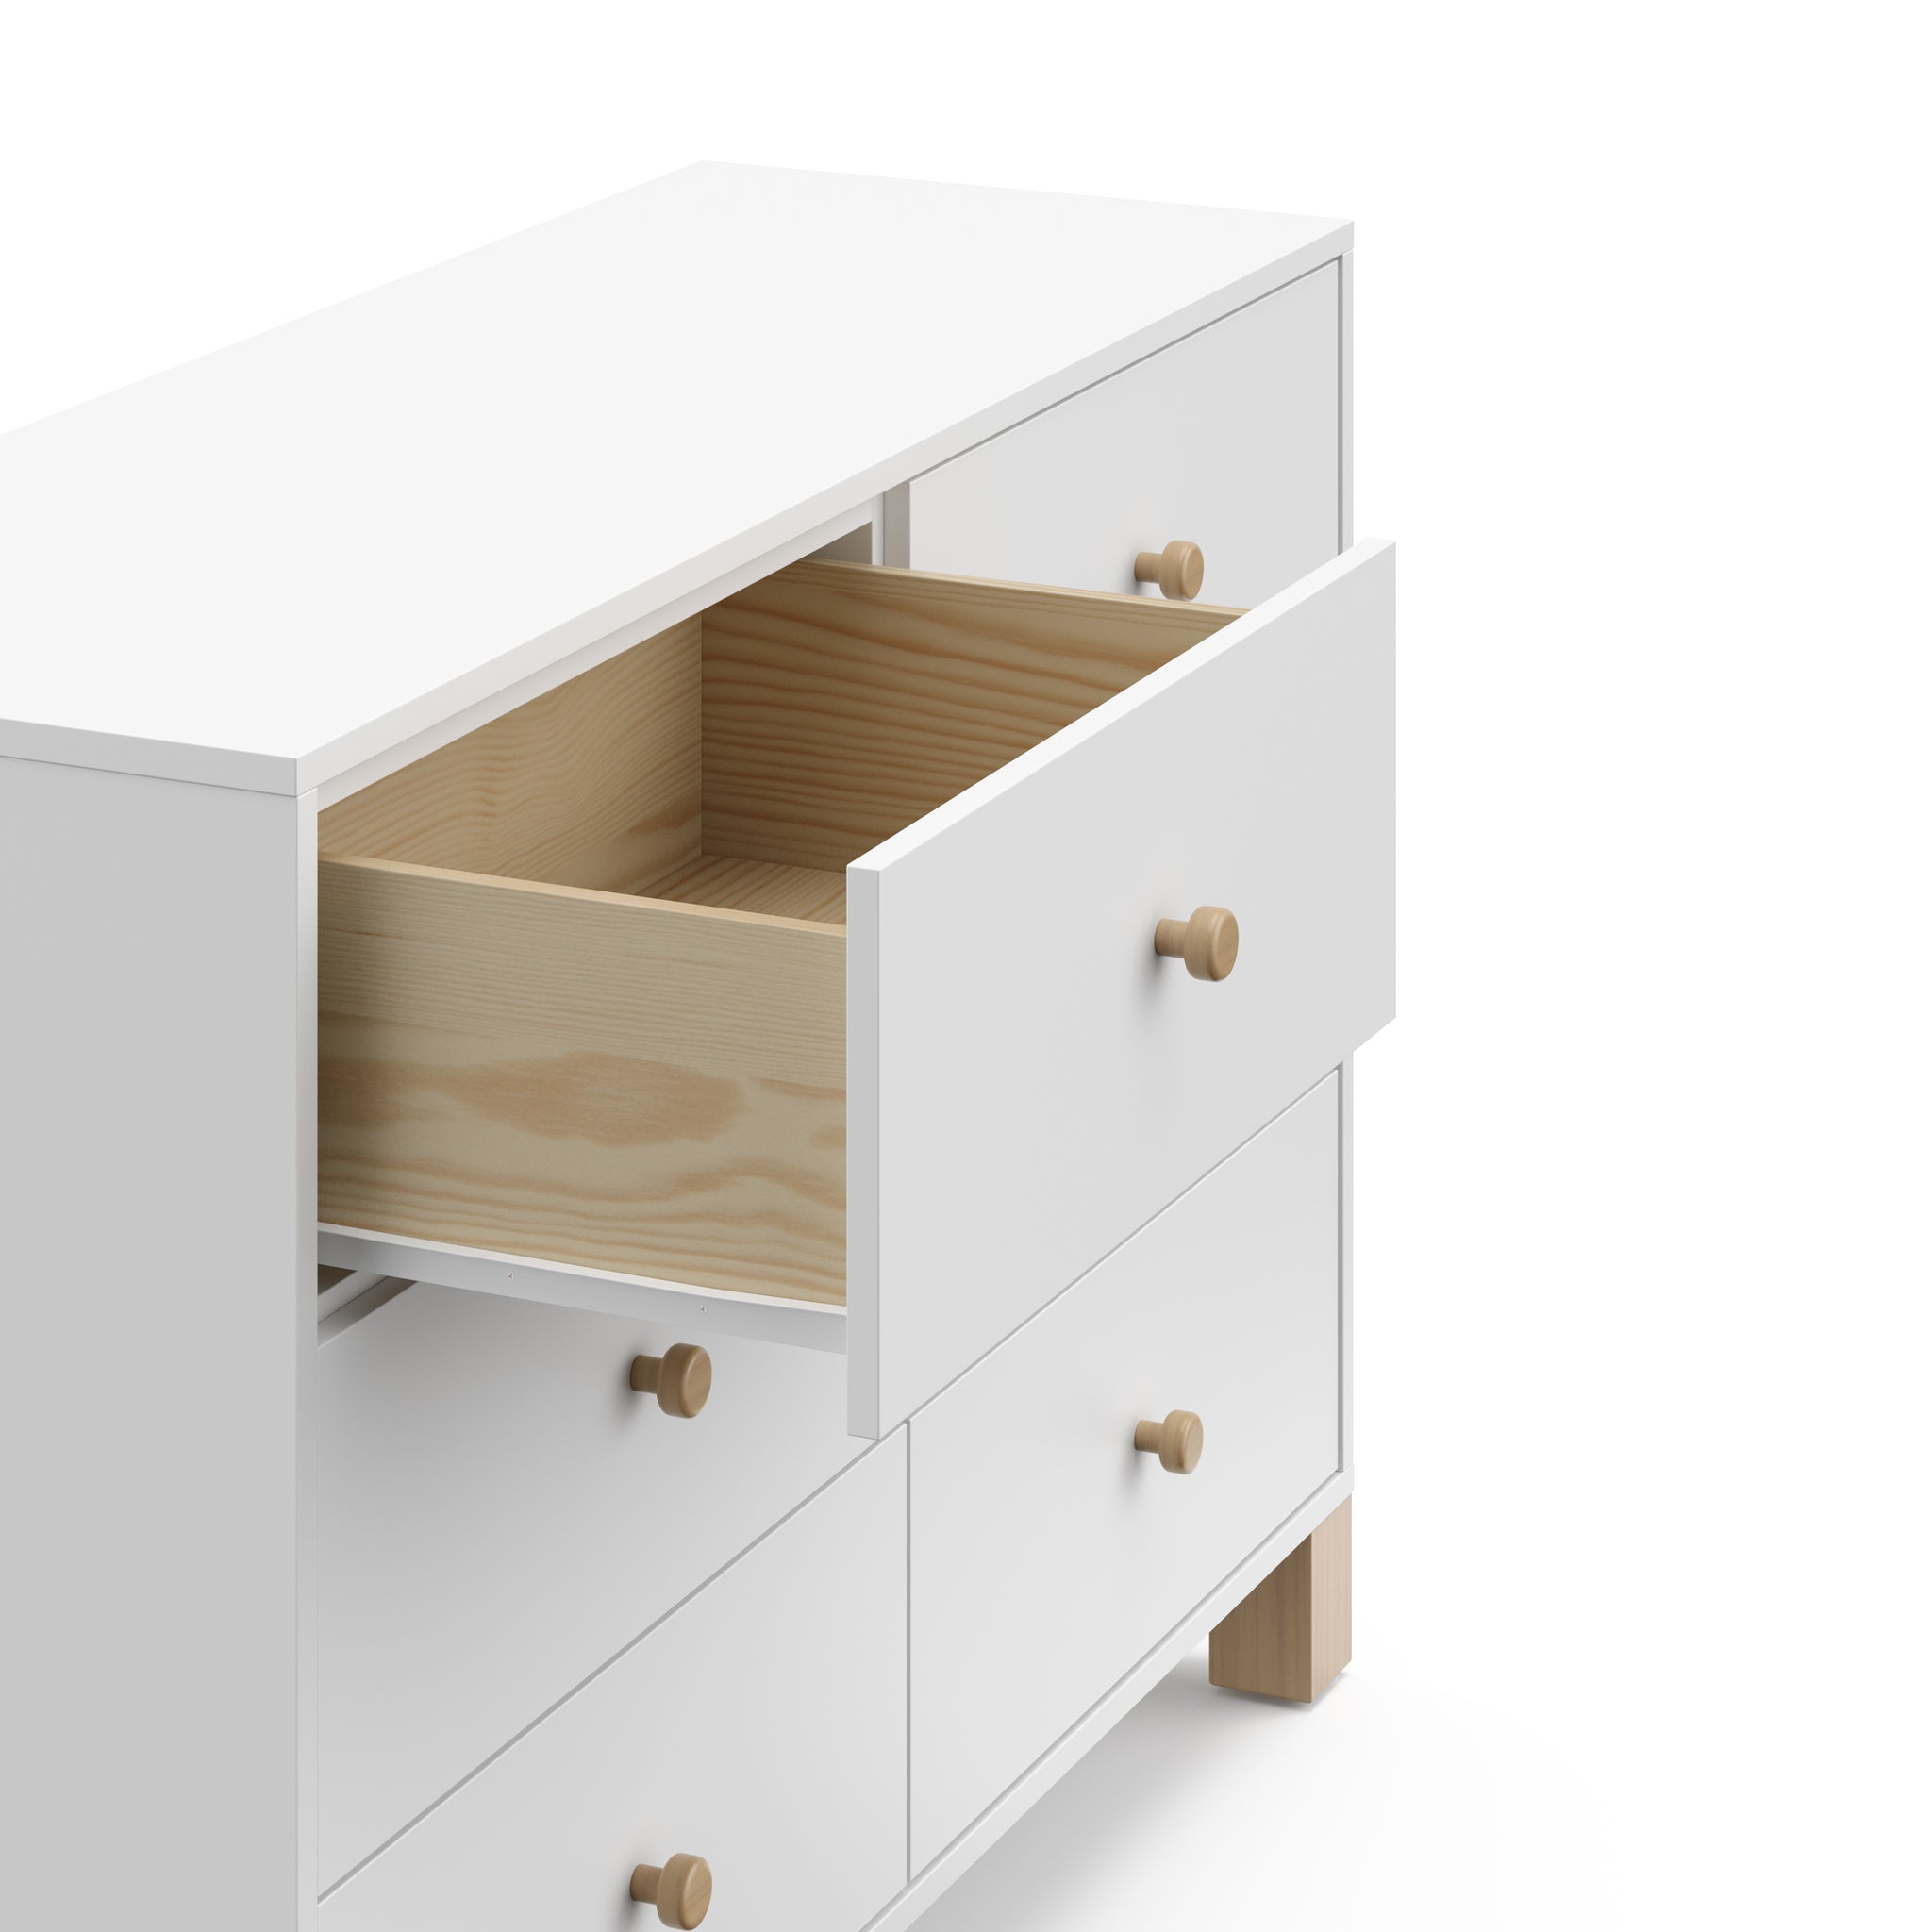 Angled view of white dresser with driftwood knobs and one drawer open